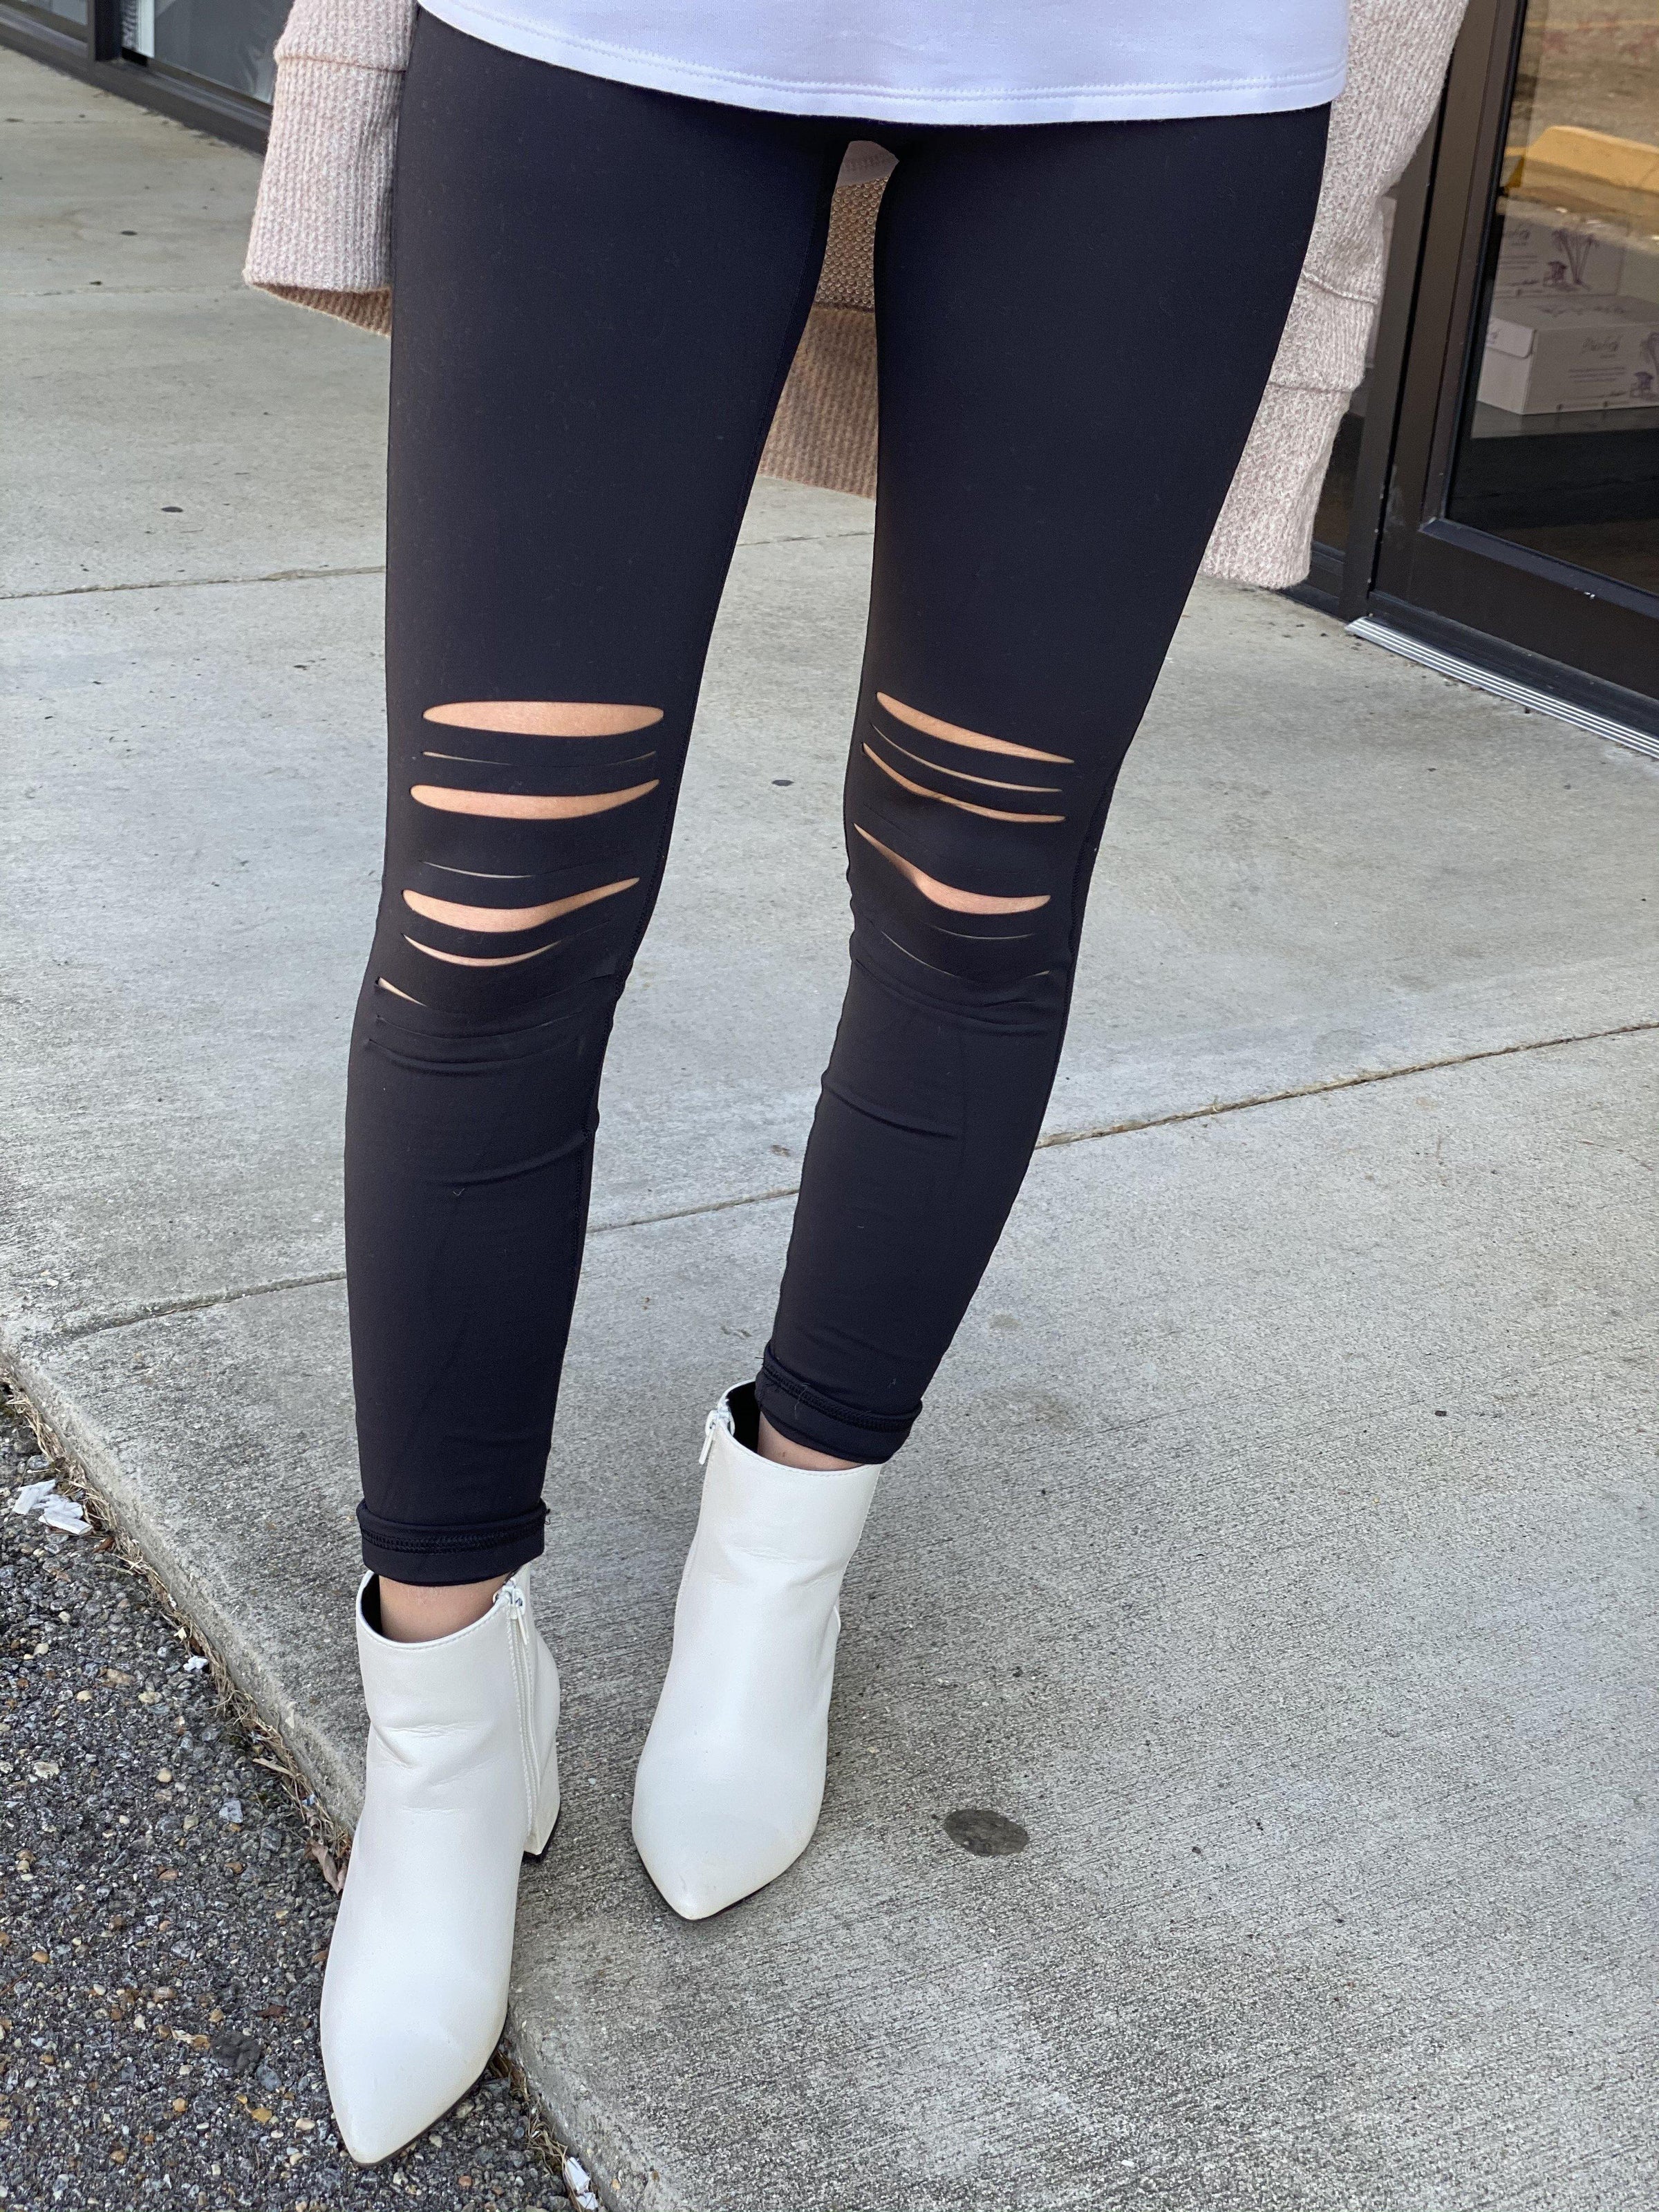 Best Day Ever Laser Cut Leggings | By Alexa Rae Boutique | Fashion & Jewelry